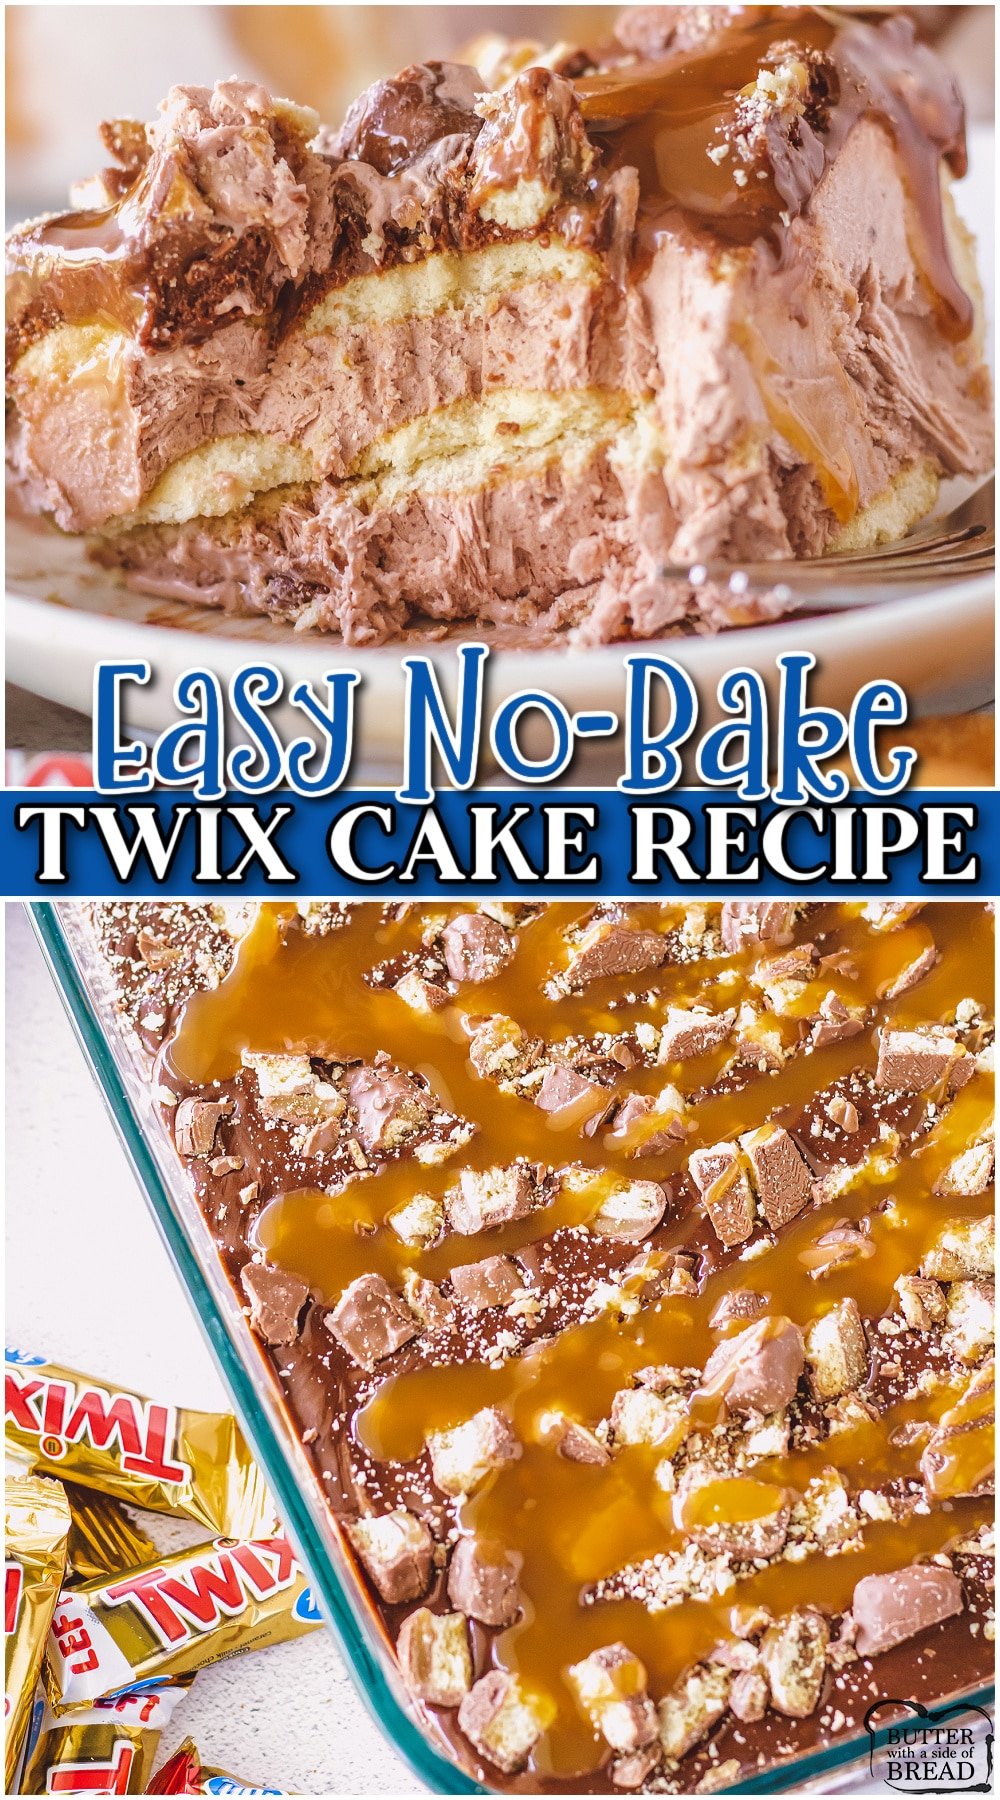 No-Bake Twix Cake is a layered pudding dessert that's perfect for summer! This no-bake cake is packed with chocolate caramel flavors & topped with Twix candy bars!